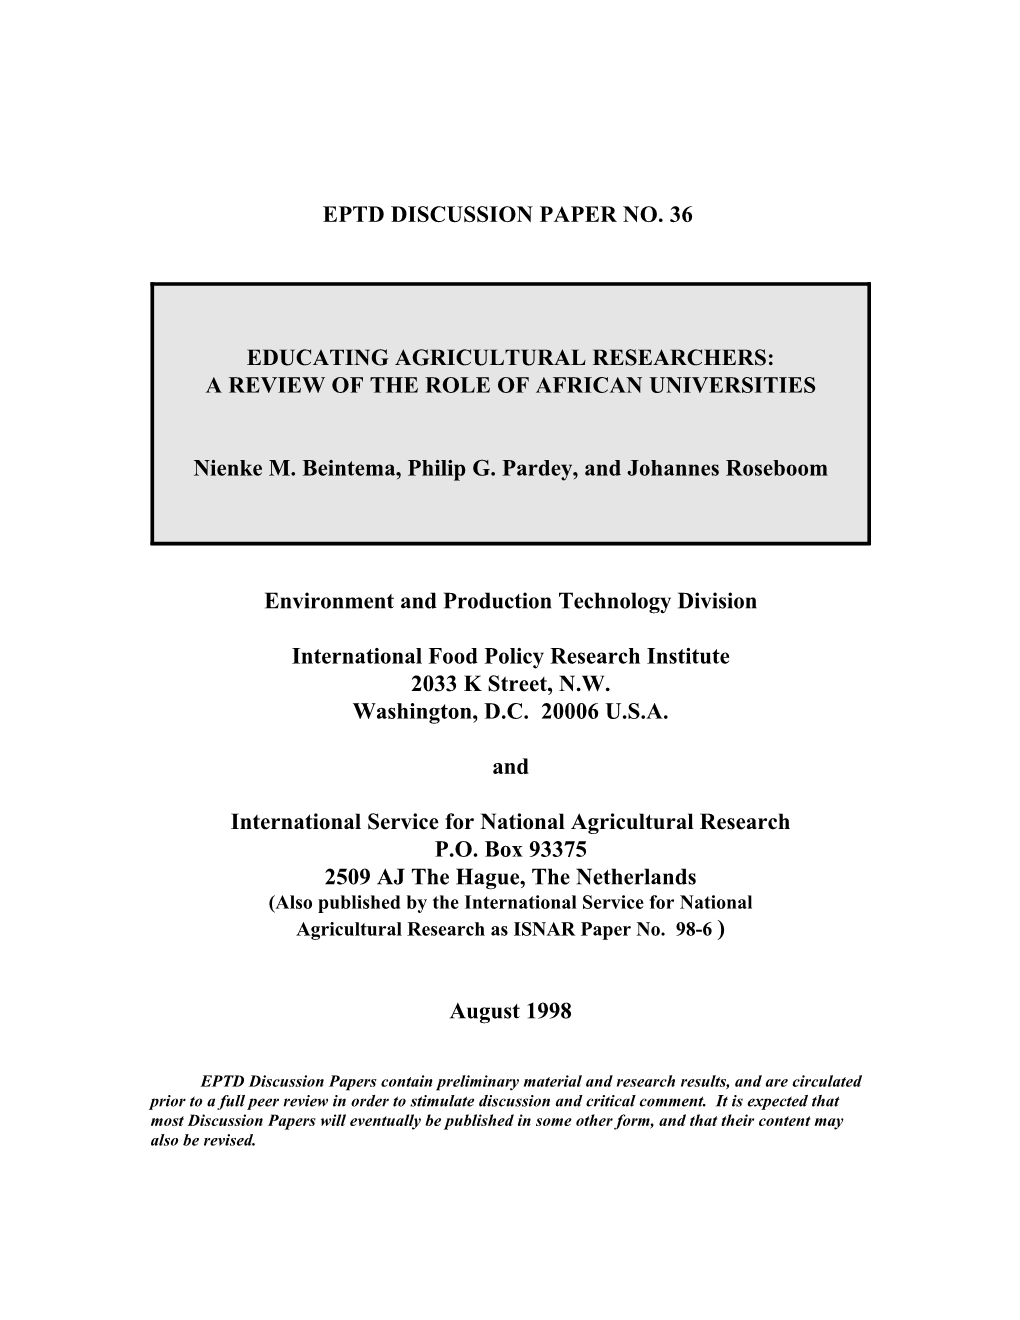 Educating Agricultural Researchers: a Review of the Role of African Universities